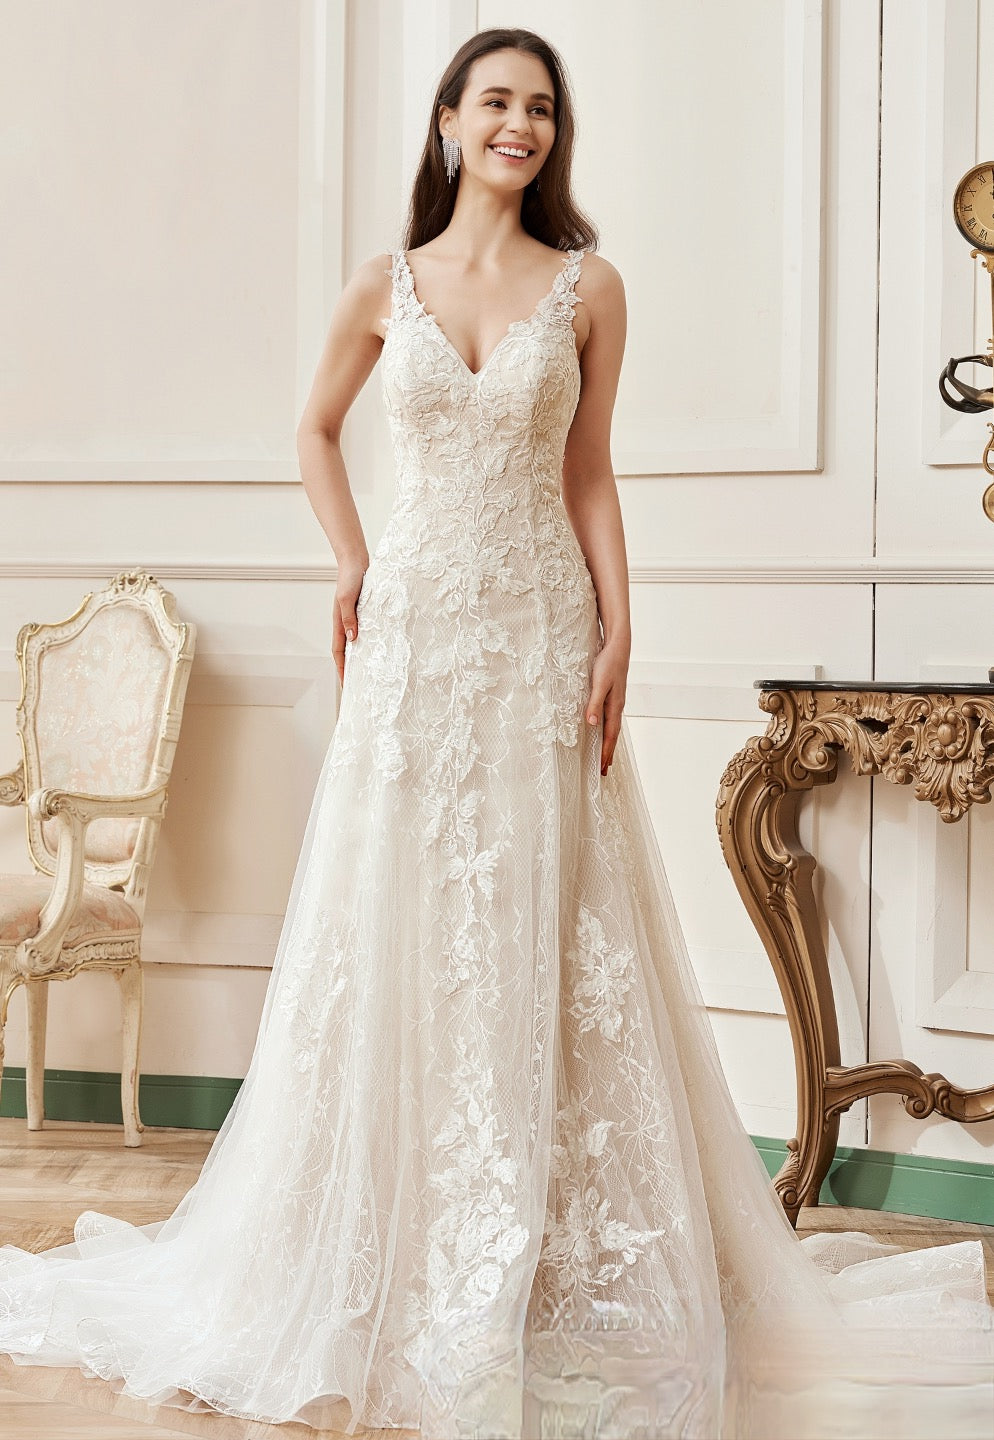 Illusion Plunging V-neckline Lace Straps Bridal Gown - Xdressy